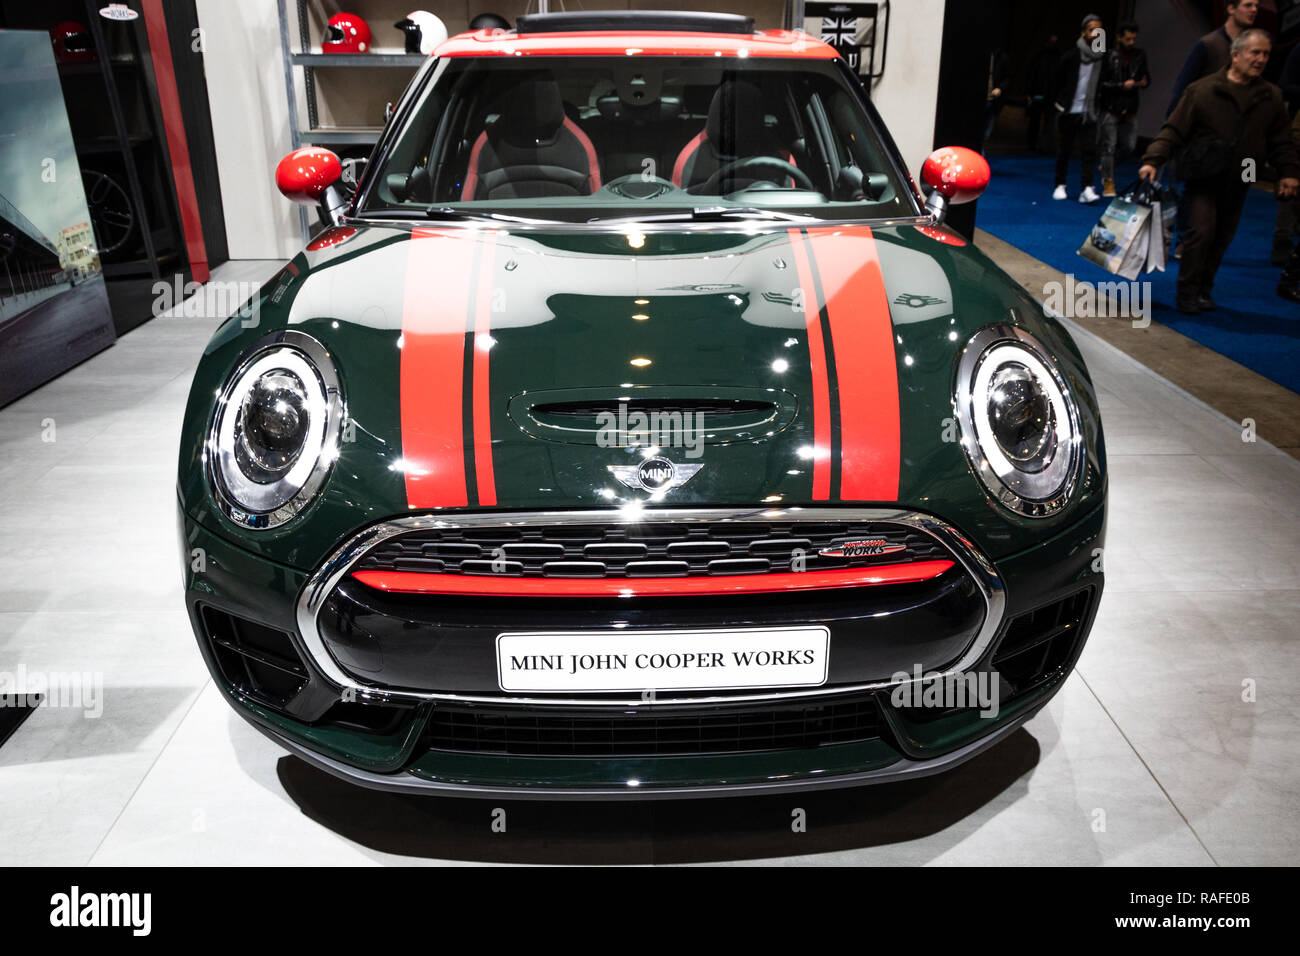 BRUSSELS - JAN 19, 2017: New Mini Cooper car showcased at the Brussels Autosalon Motor Show. Stock Photo